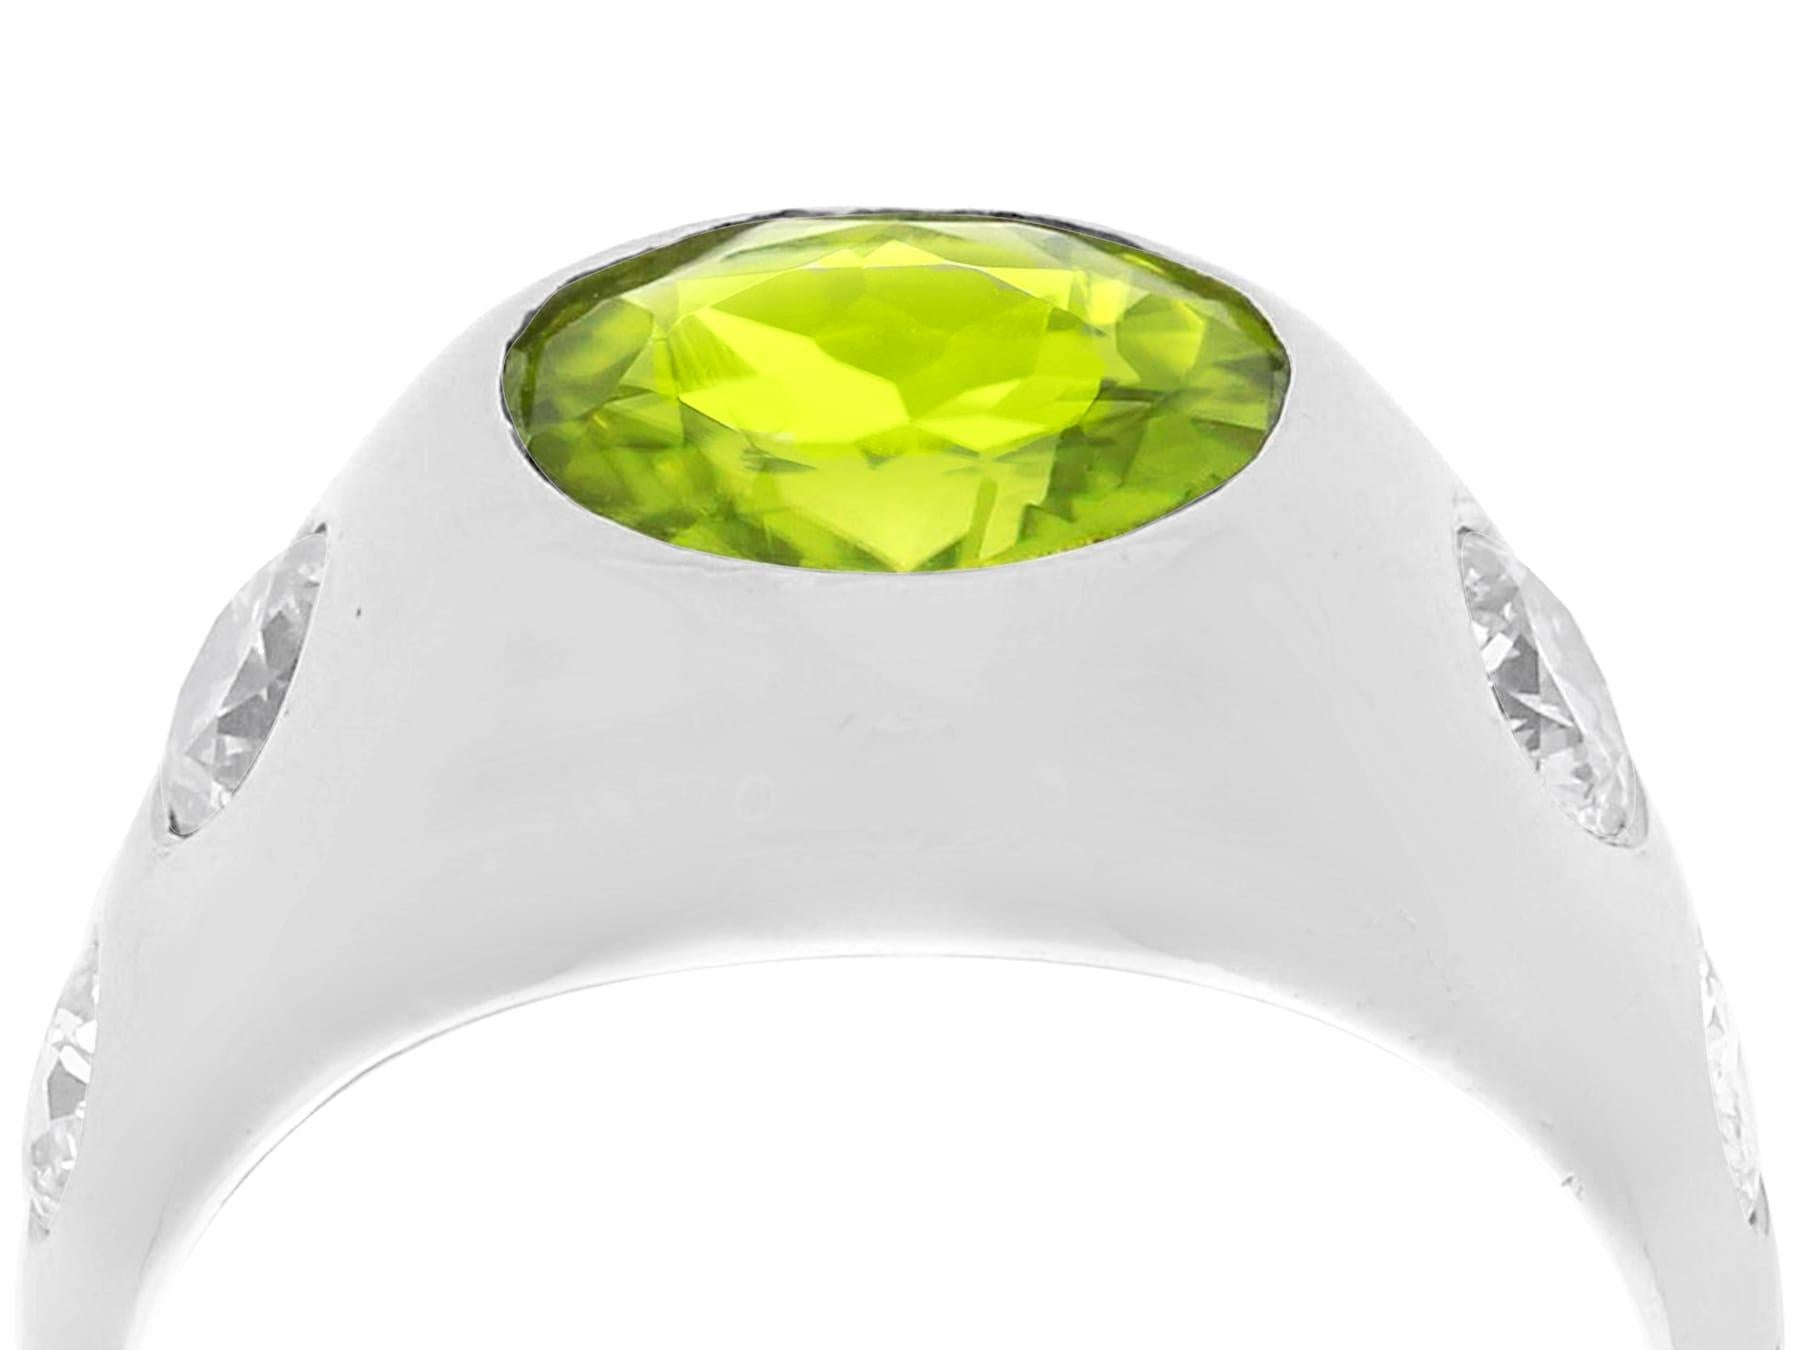 A stunning, fine and impressive vintage 2.15 carat peridot and 0.70 carat diamond, platinum dress ring; part of our diverse gemstone jewellery and estate jewelry collections

This stunning, fine and impressive vintage ring has been crafted in